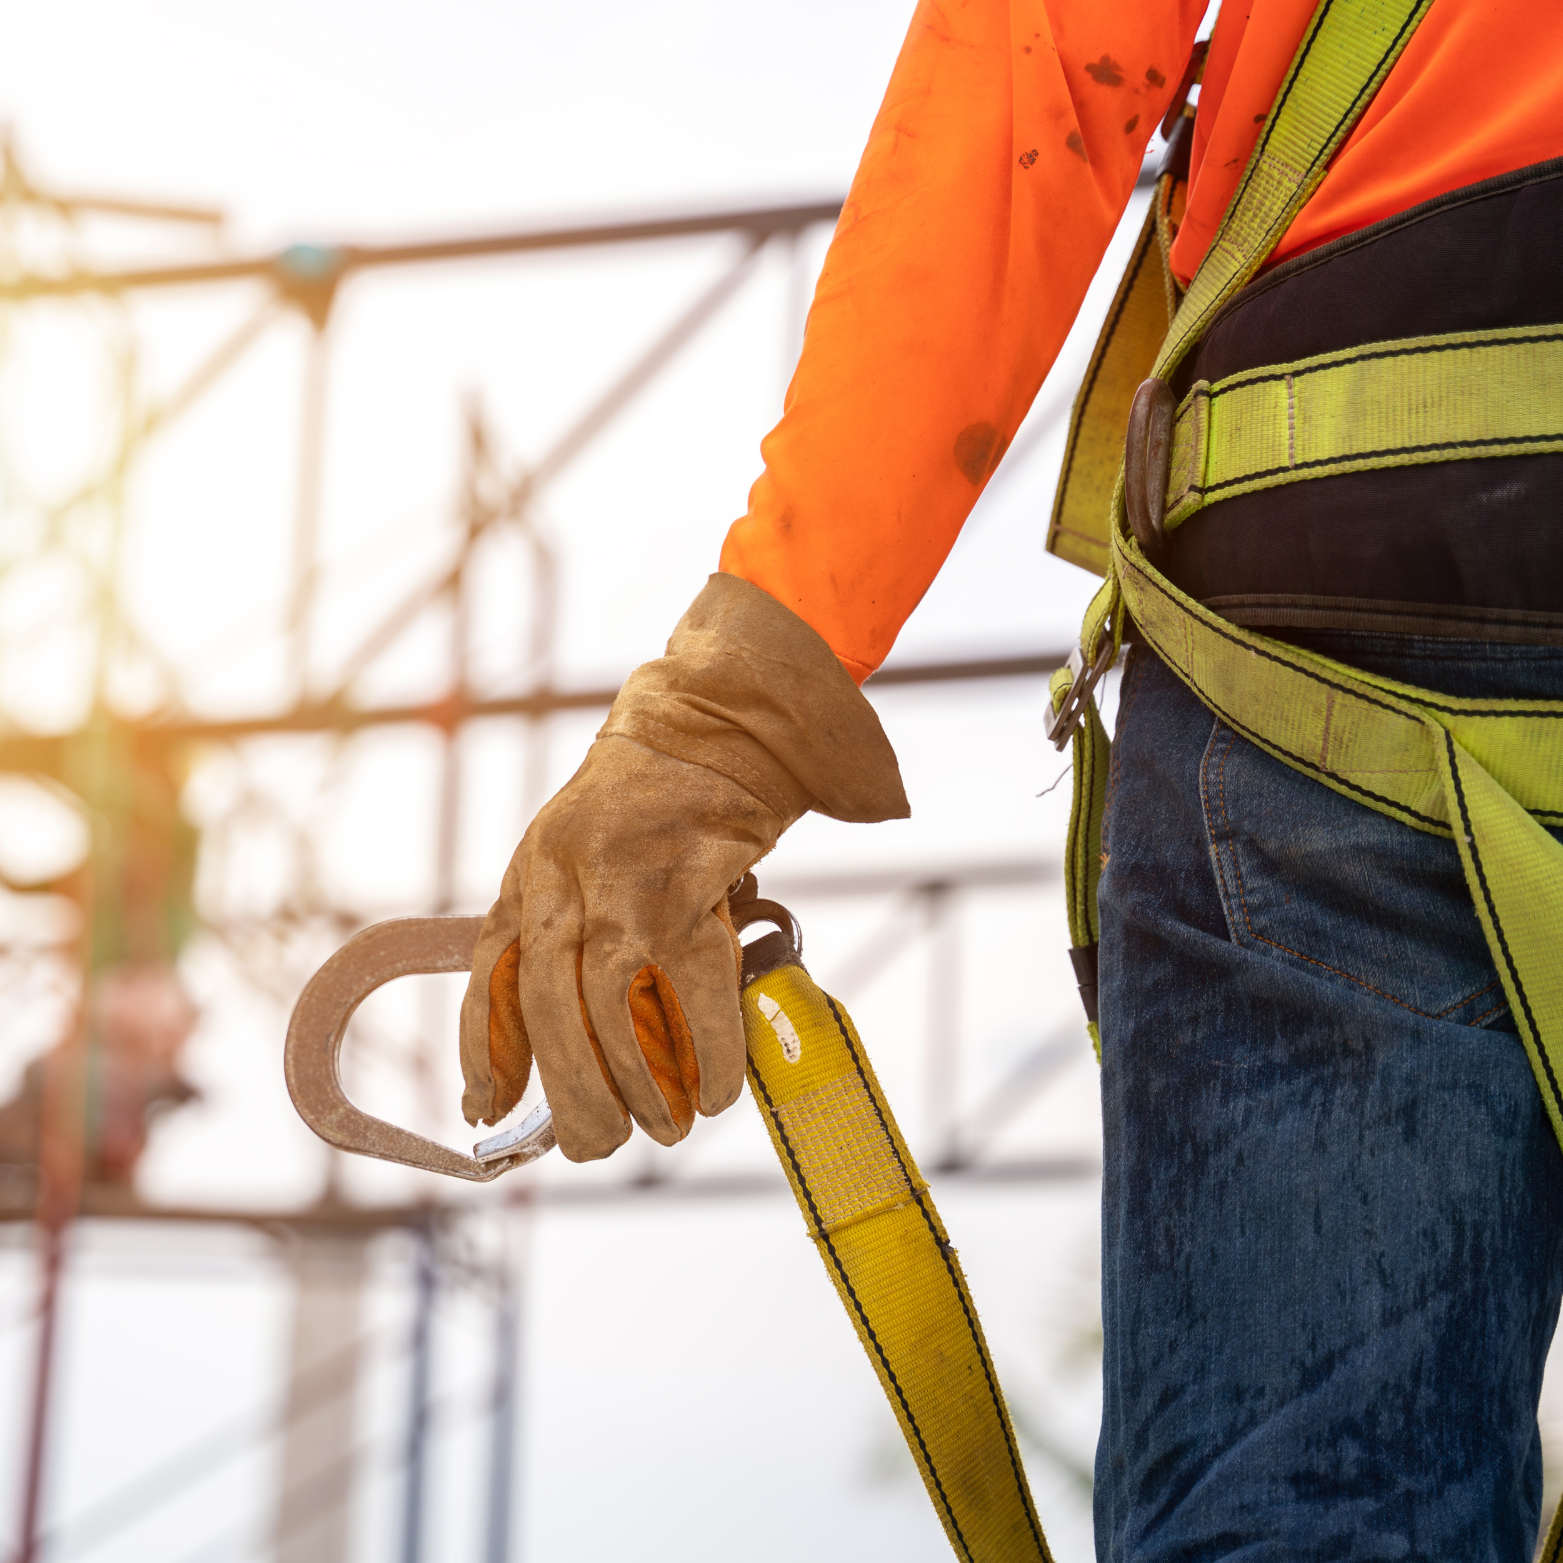 Construction worker in safety gear holding a carabiner attached to a yellow safety harness, with scaffolding in the background.